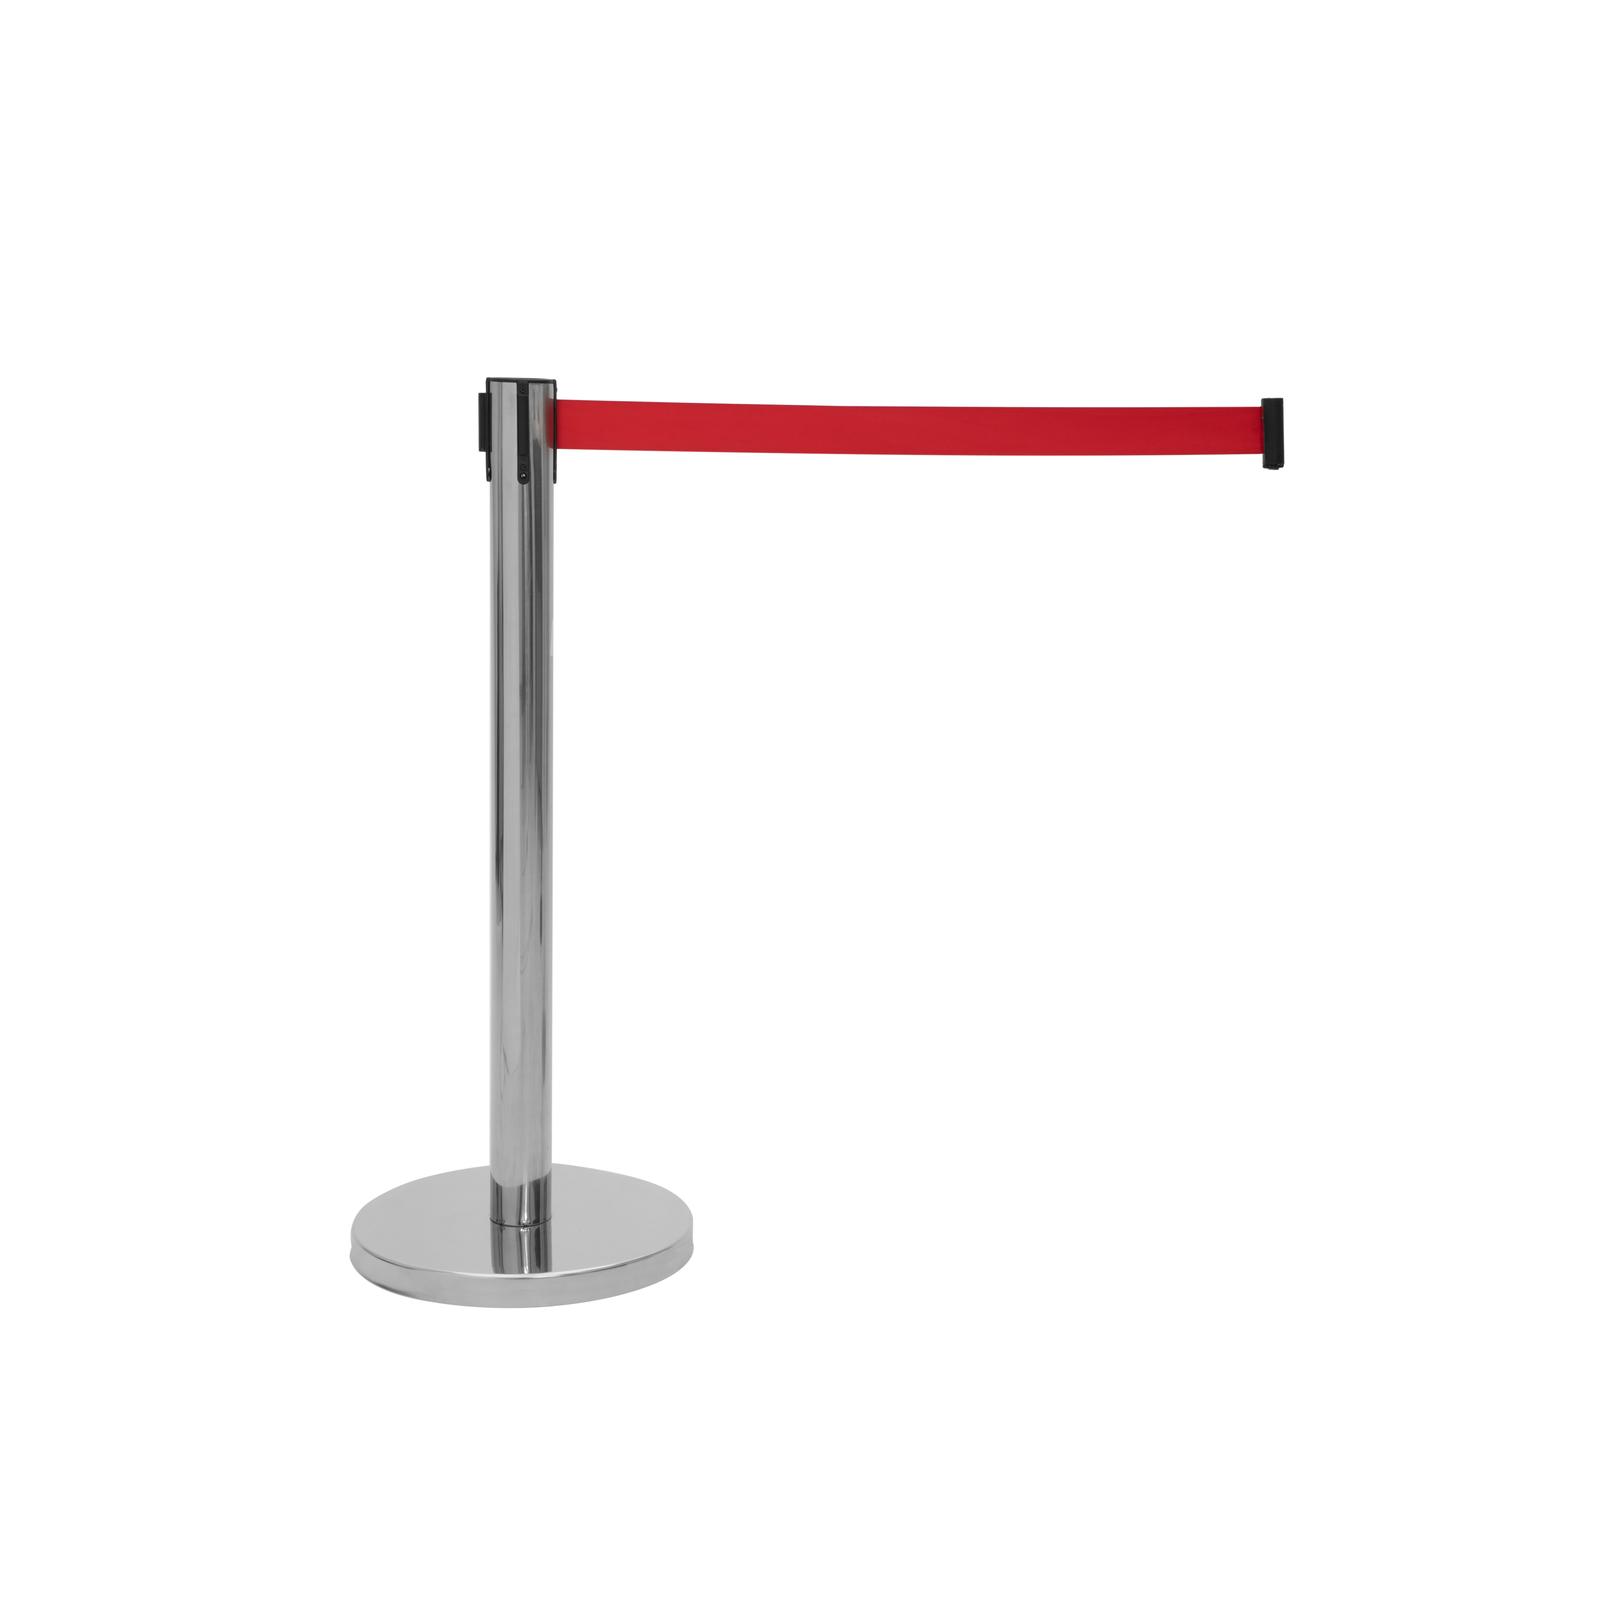 EUROLITE Barrier System with Retractable red Belt